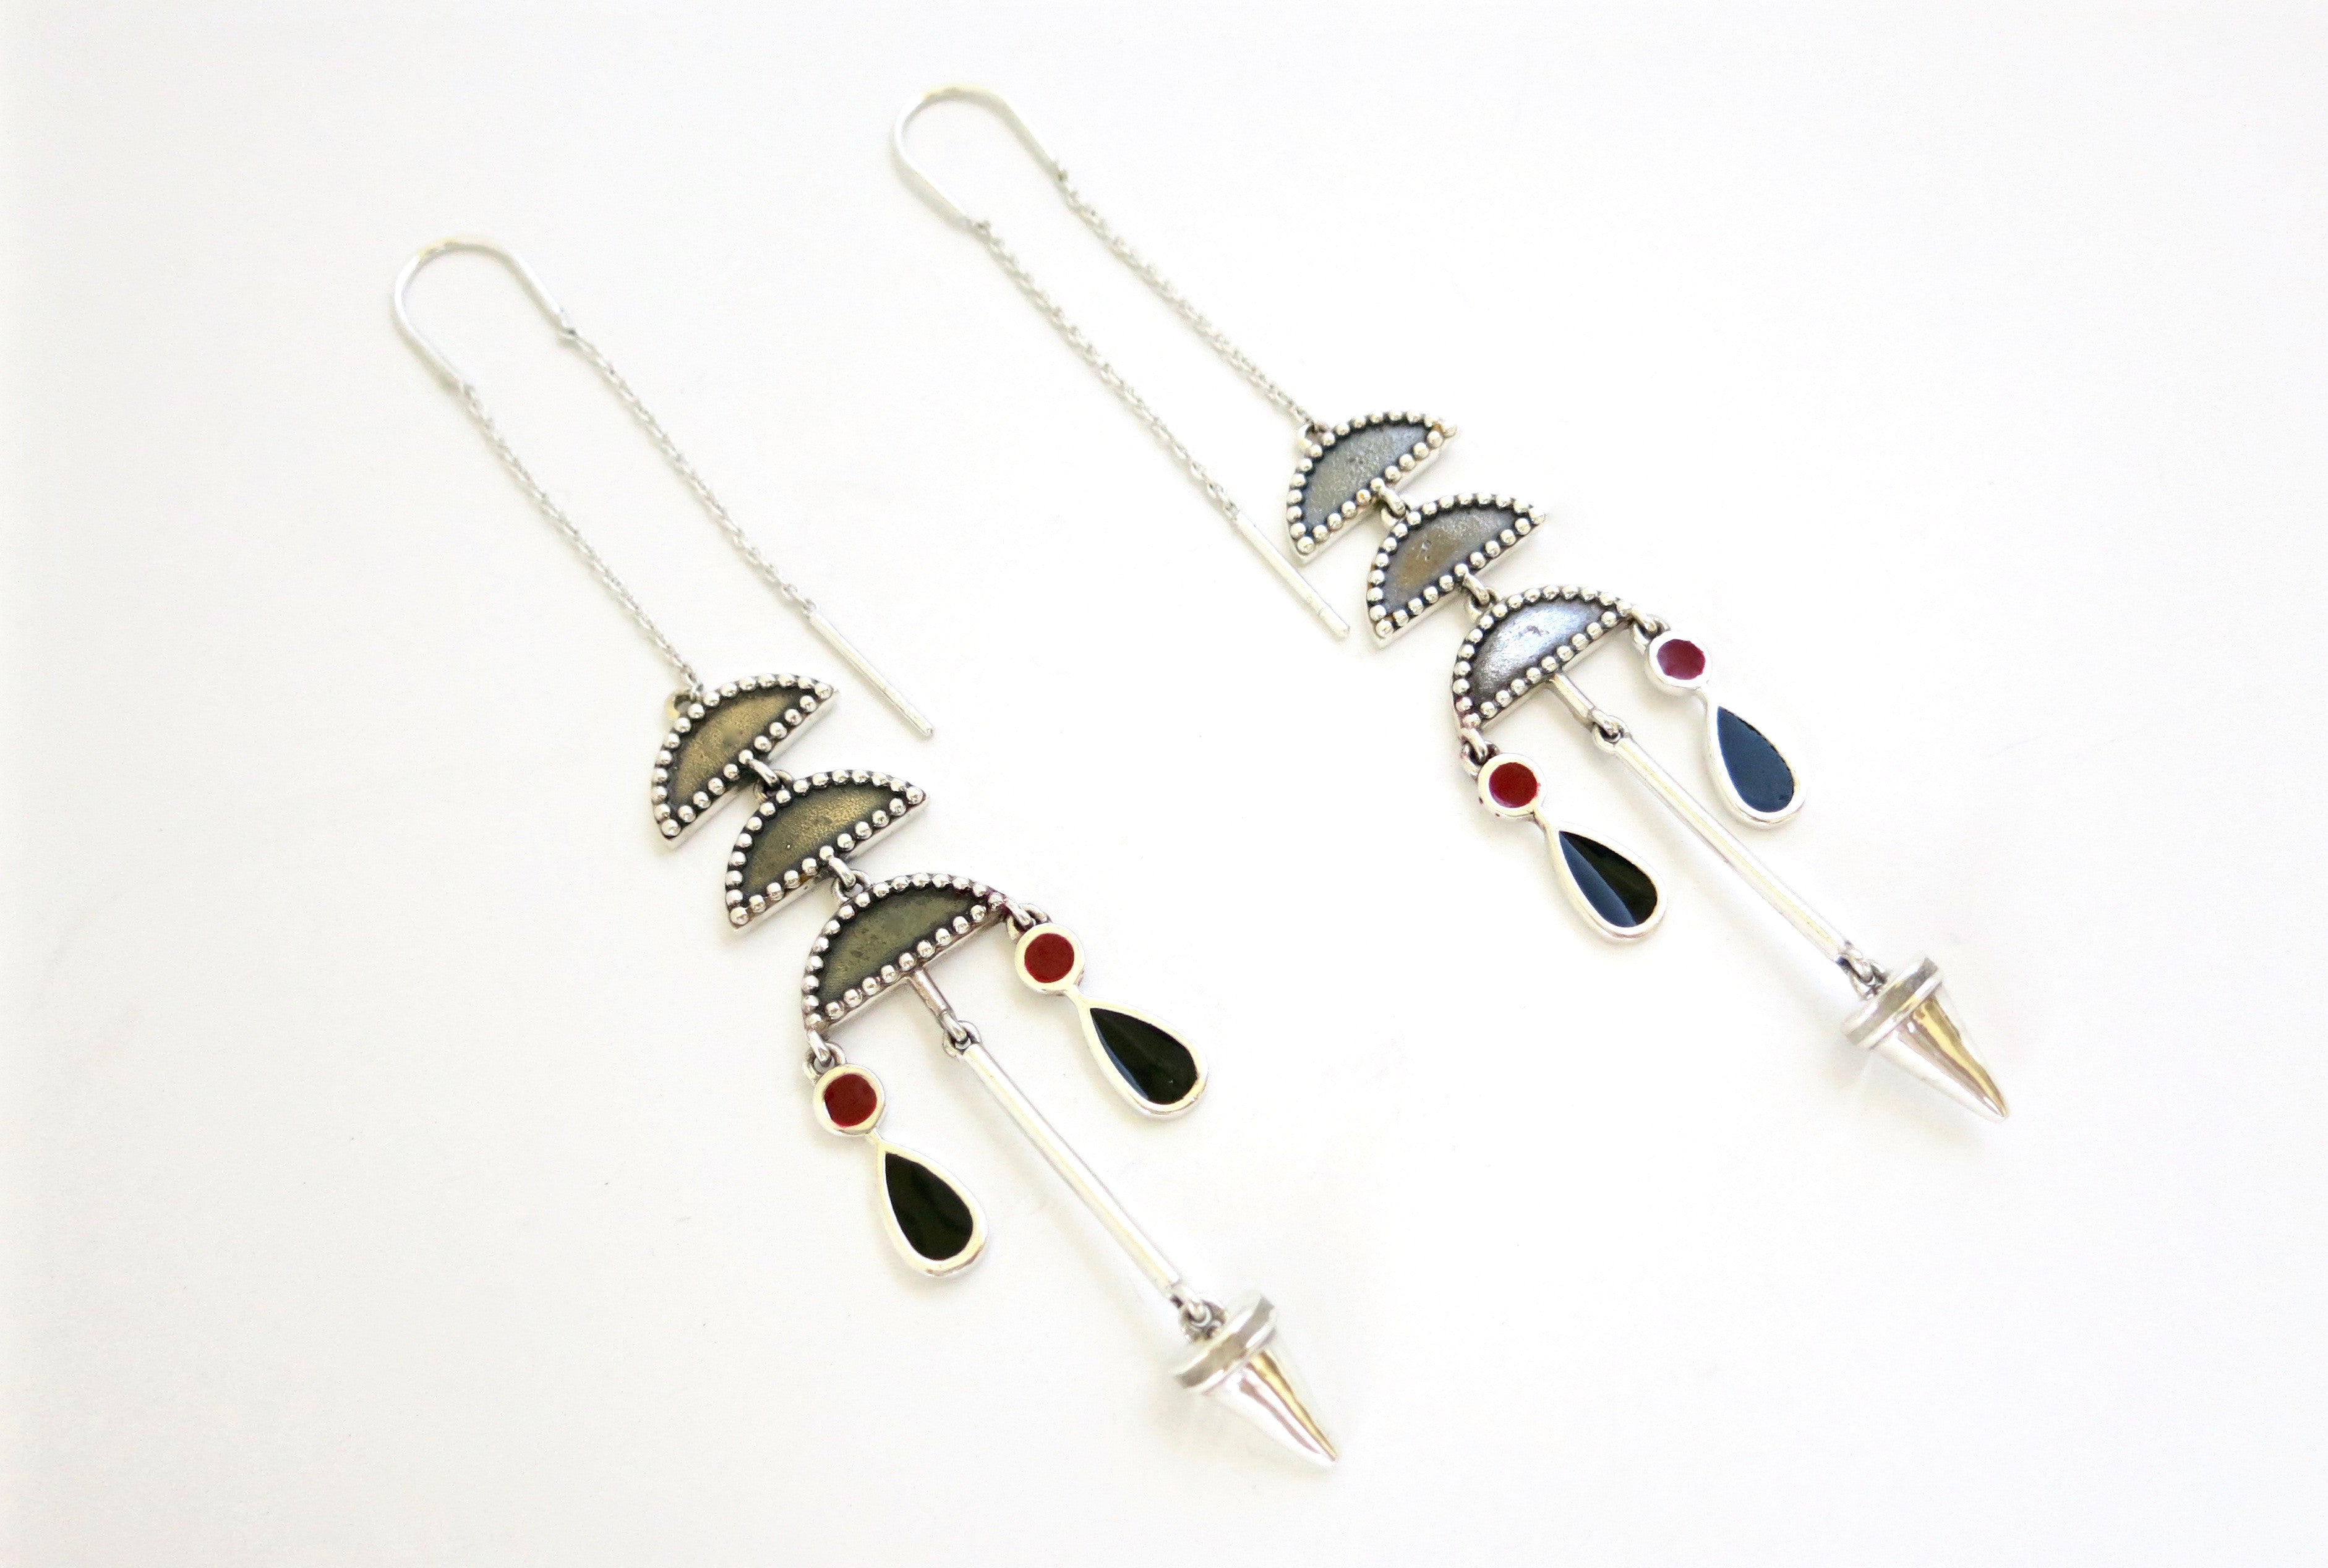 Artistic, chic, long threader earrings with enamel detailing (PB-10264-ER)  Earrings Sterling silver handcrafted jewellery. 925 pure silver jewellery. Handmade in India, fair trade, artisan jewellery. Lai